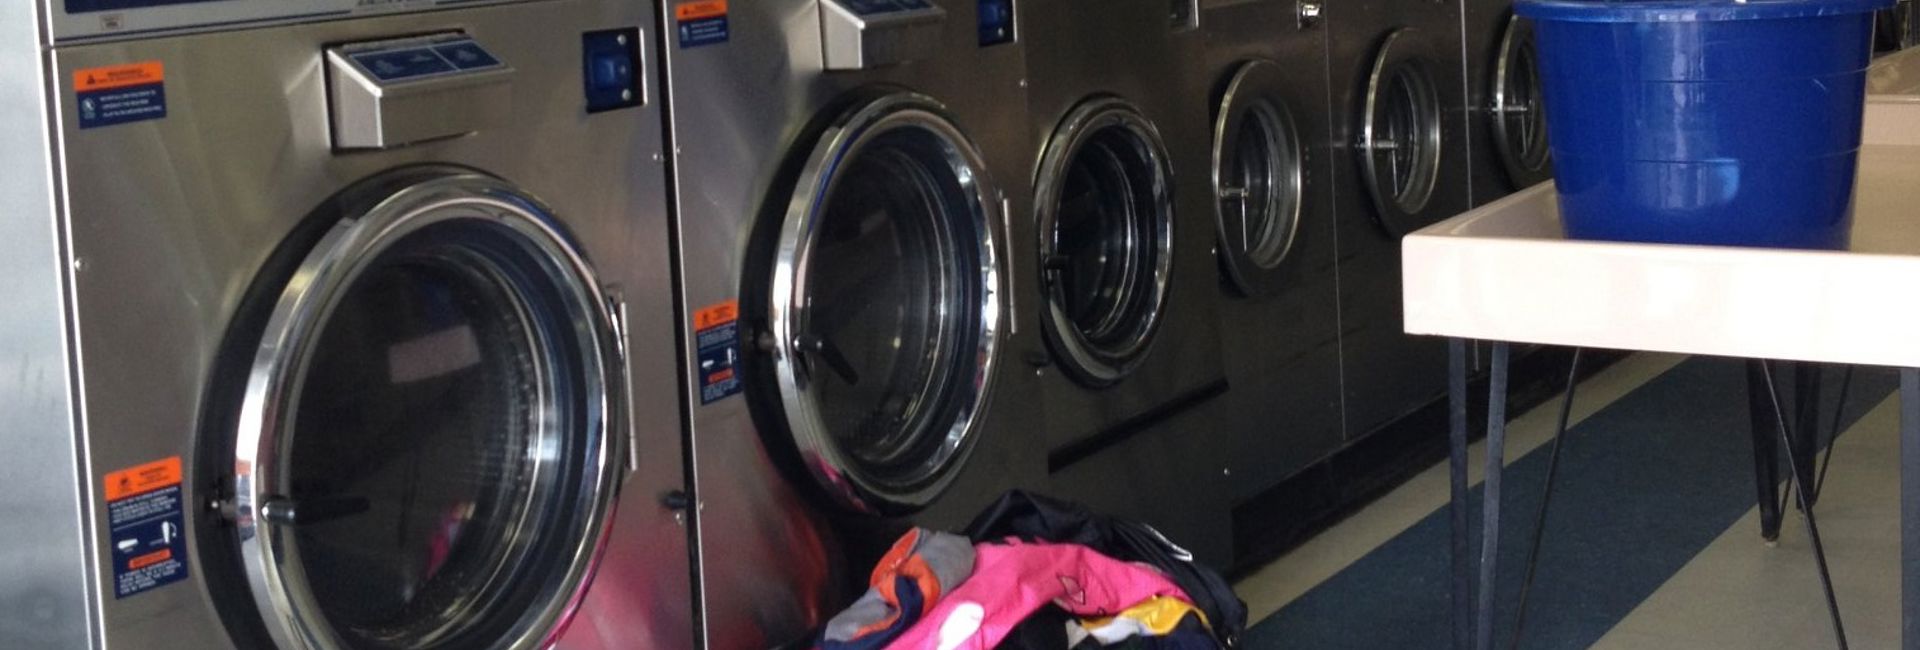 Laundry Pickup Service In Safety Harbor